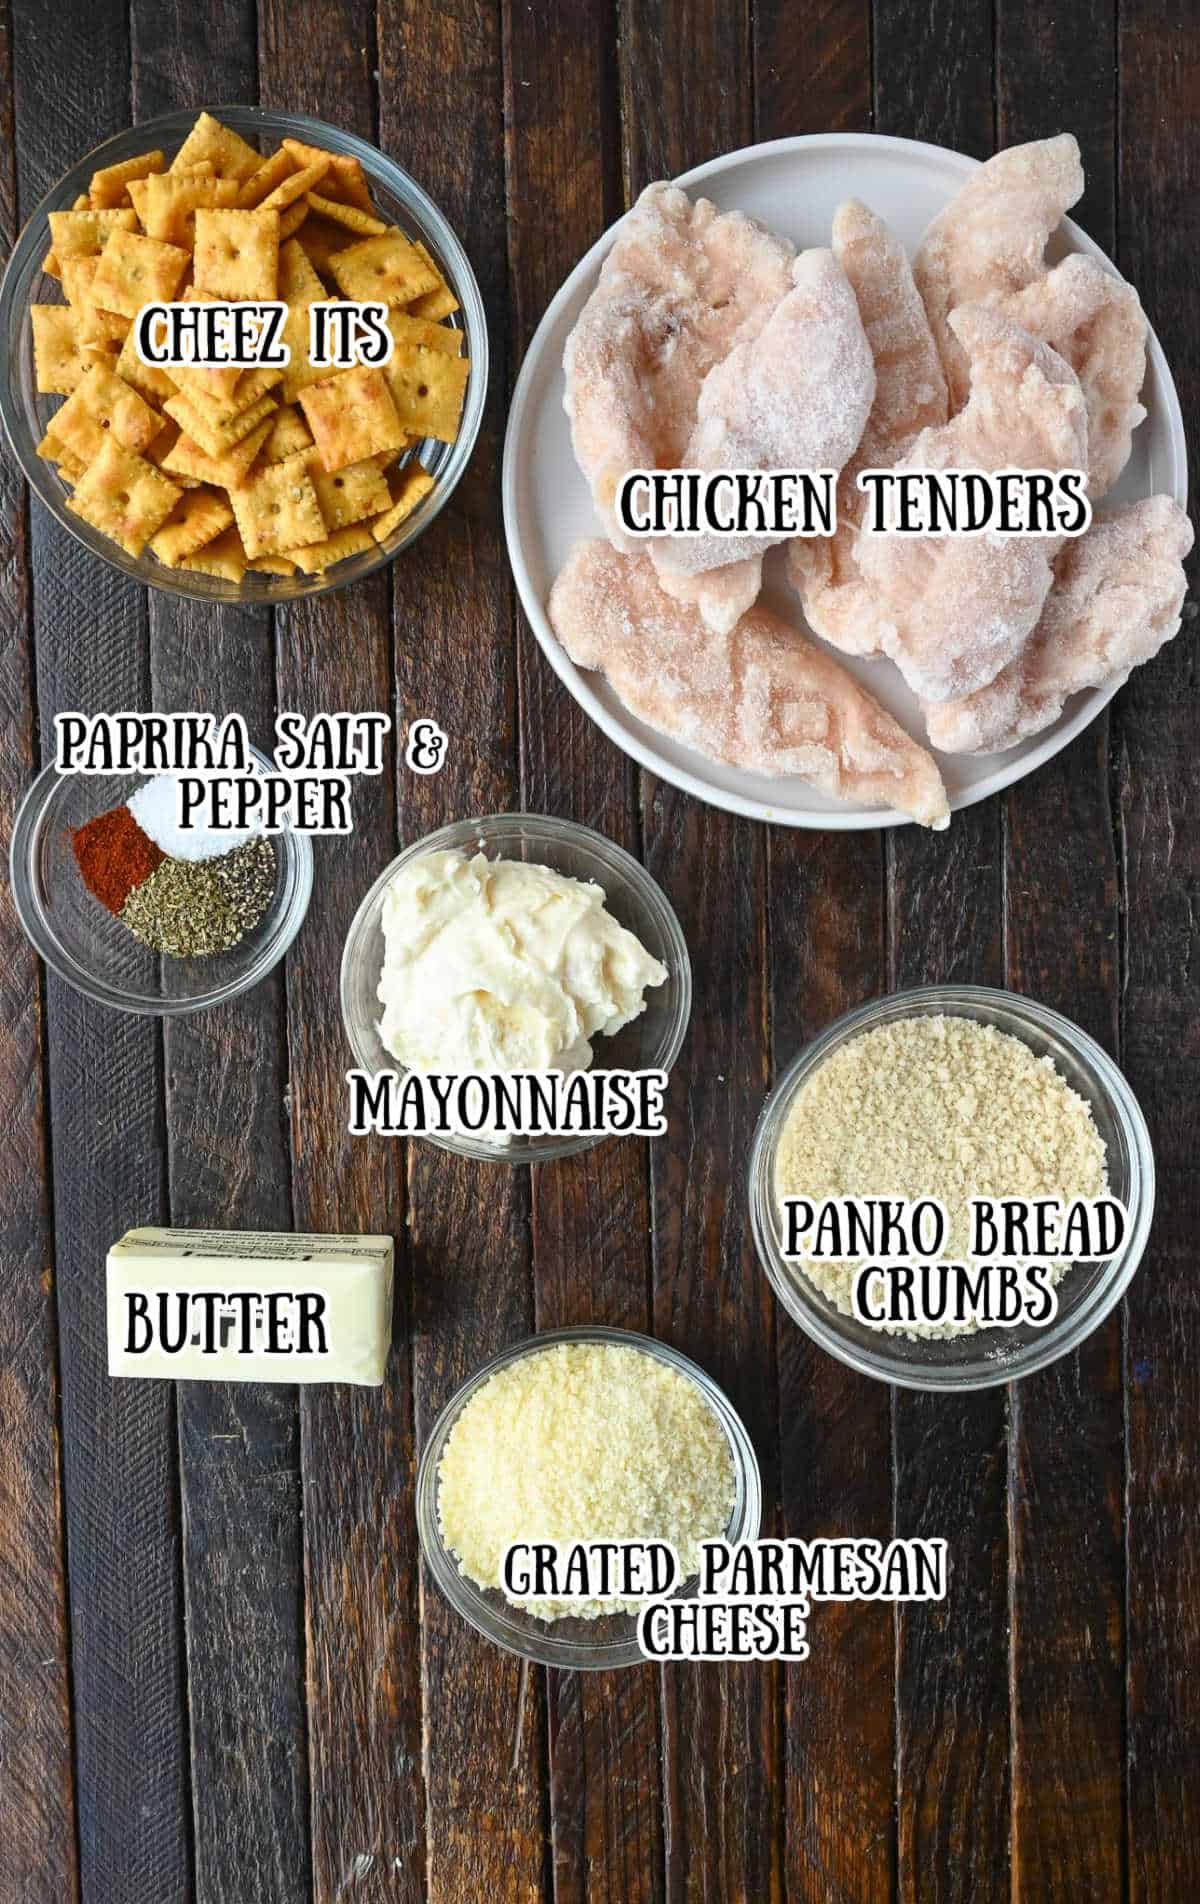 All the ingredients needed for these cheez it chicken tenders.